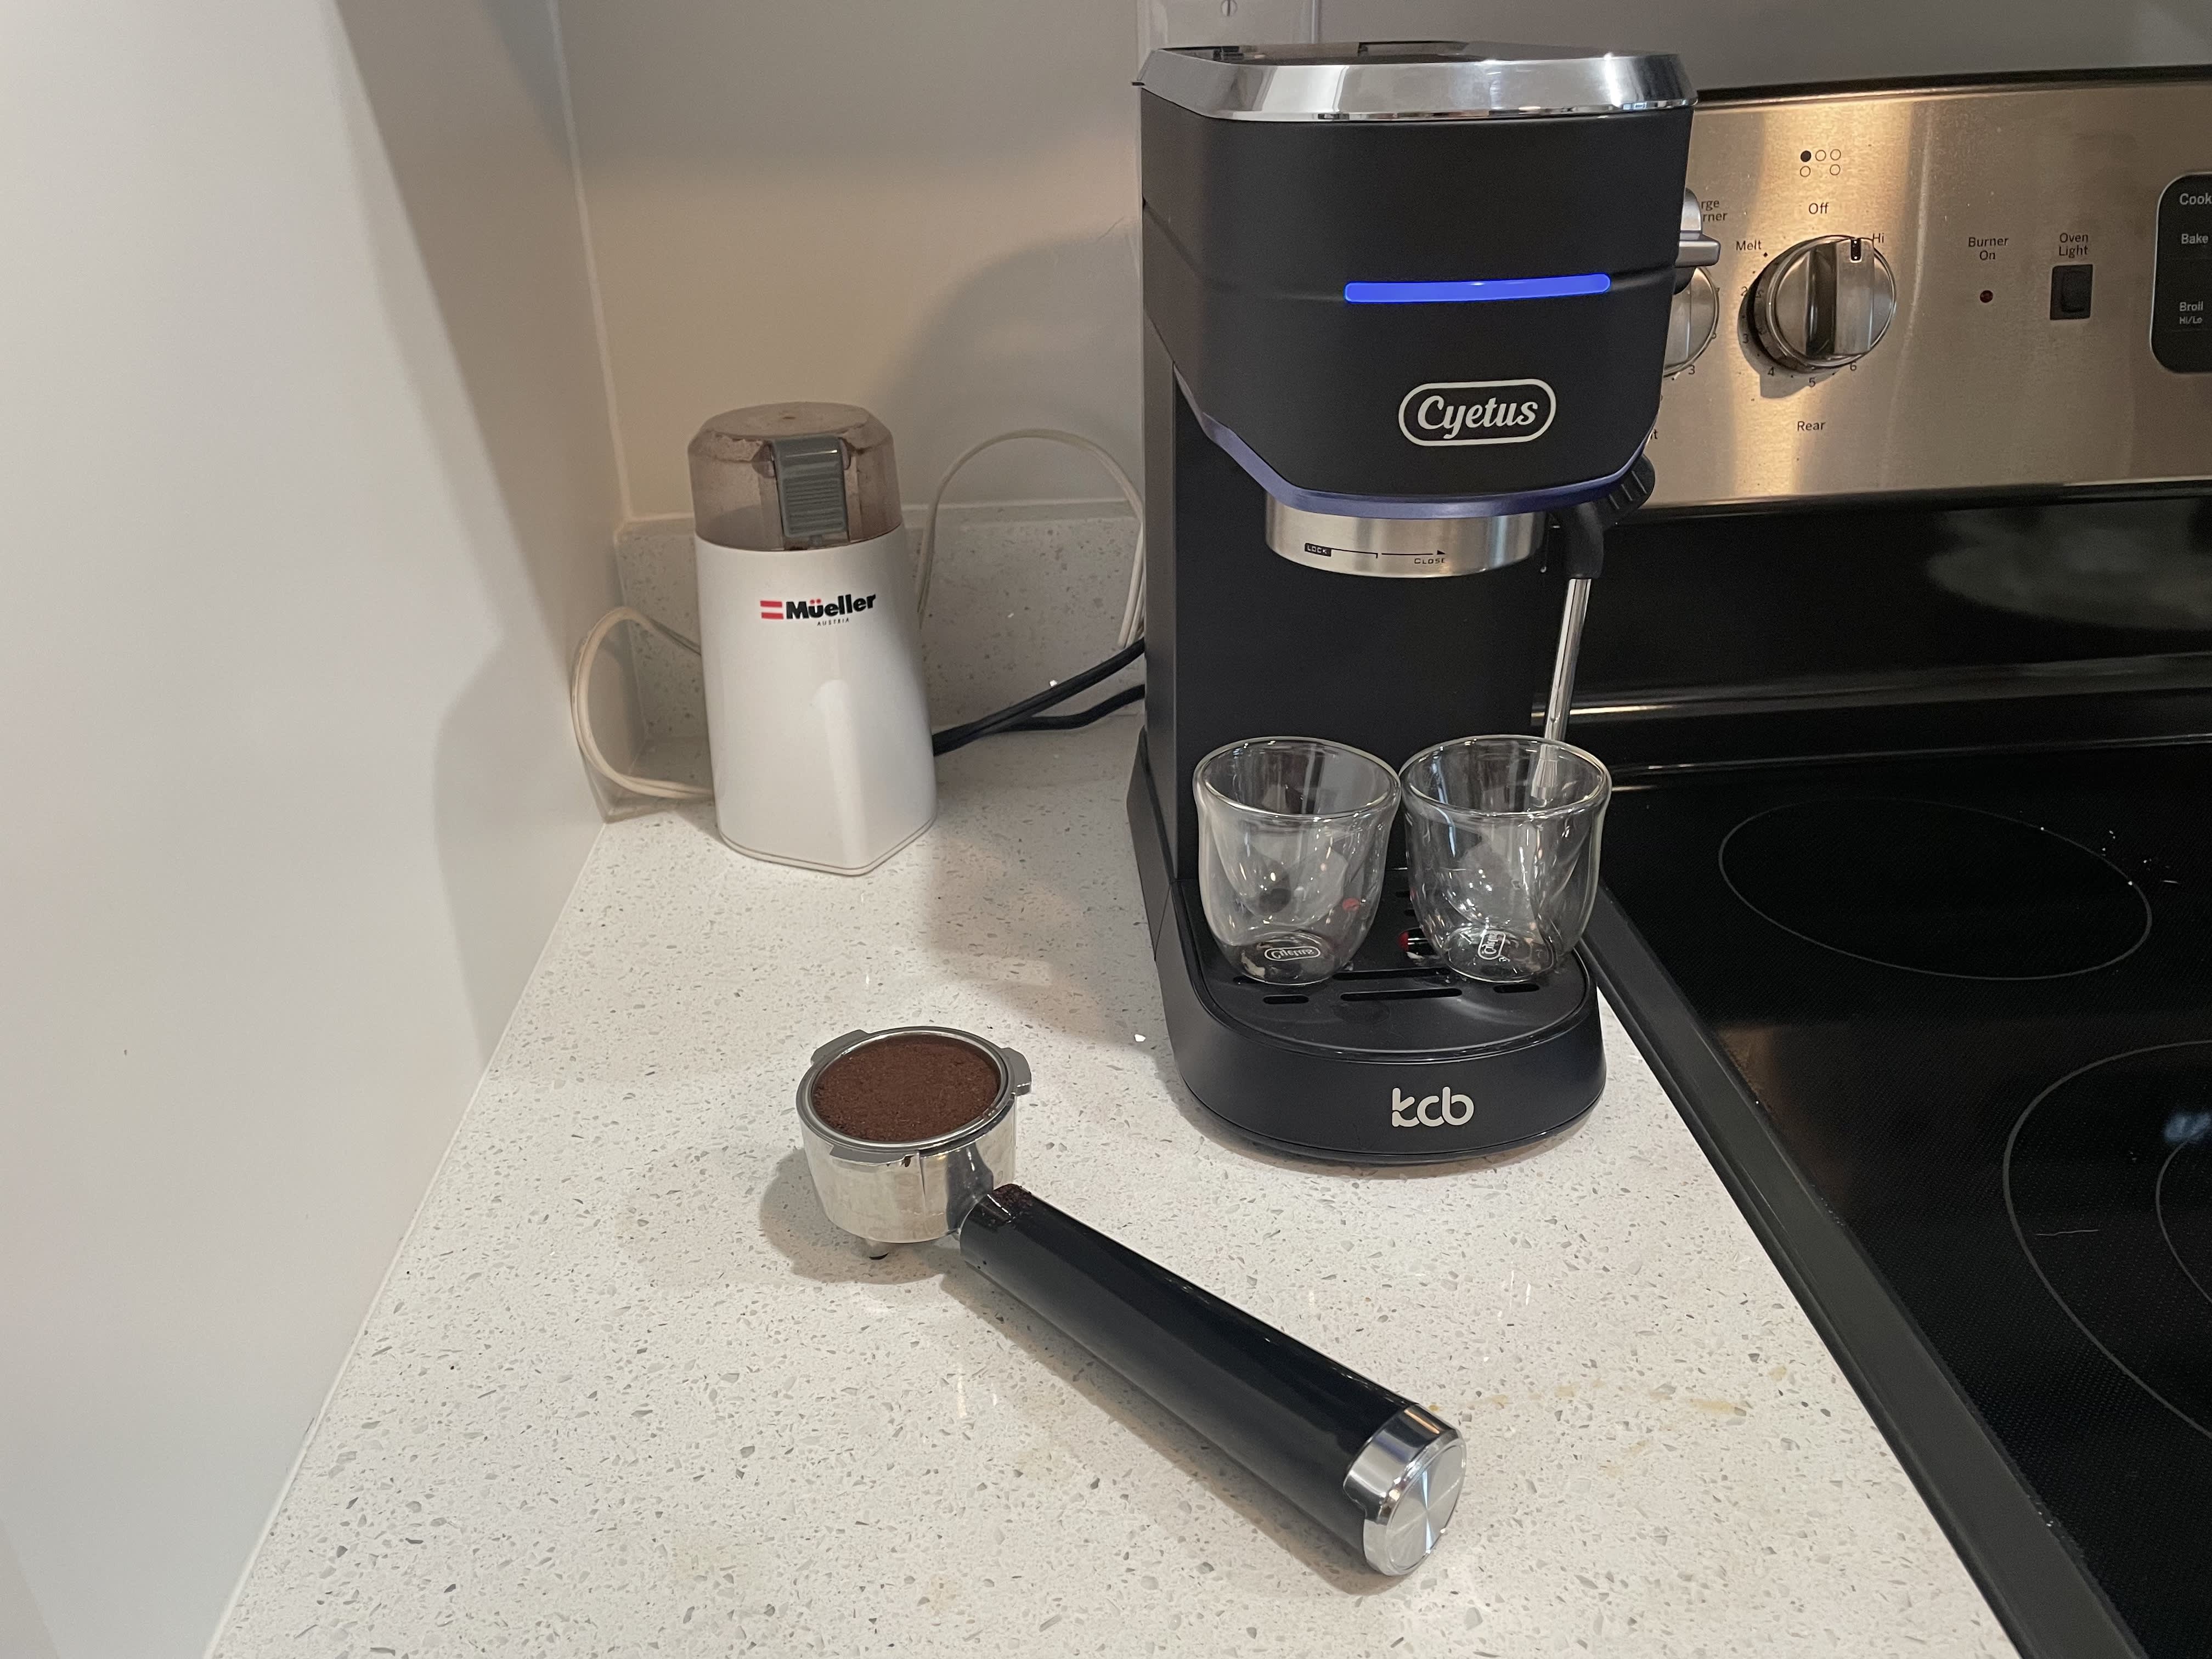 Appliance Brand Cyetus Launches Cyetus Mini Espresso, An Innovative 4-in-1 Coffee  Machine With A Compact, Cactus-Inspired Design